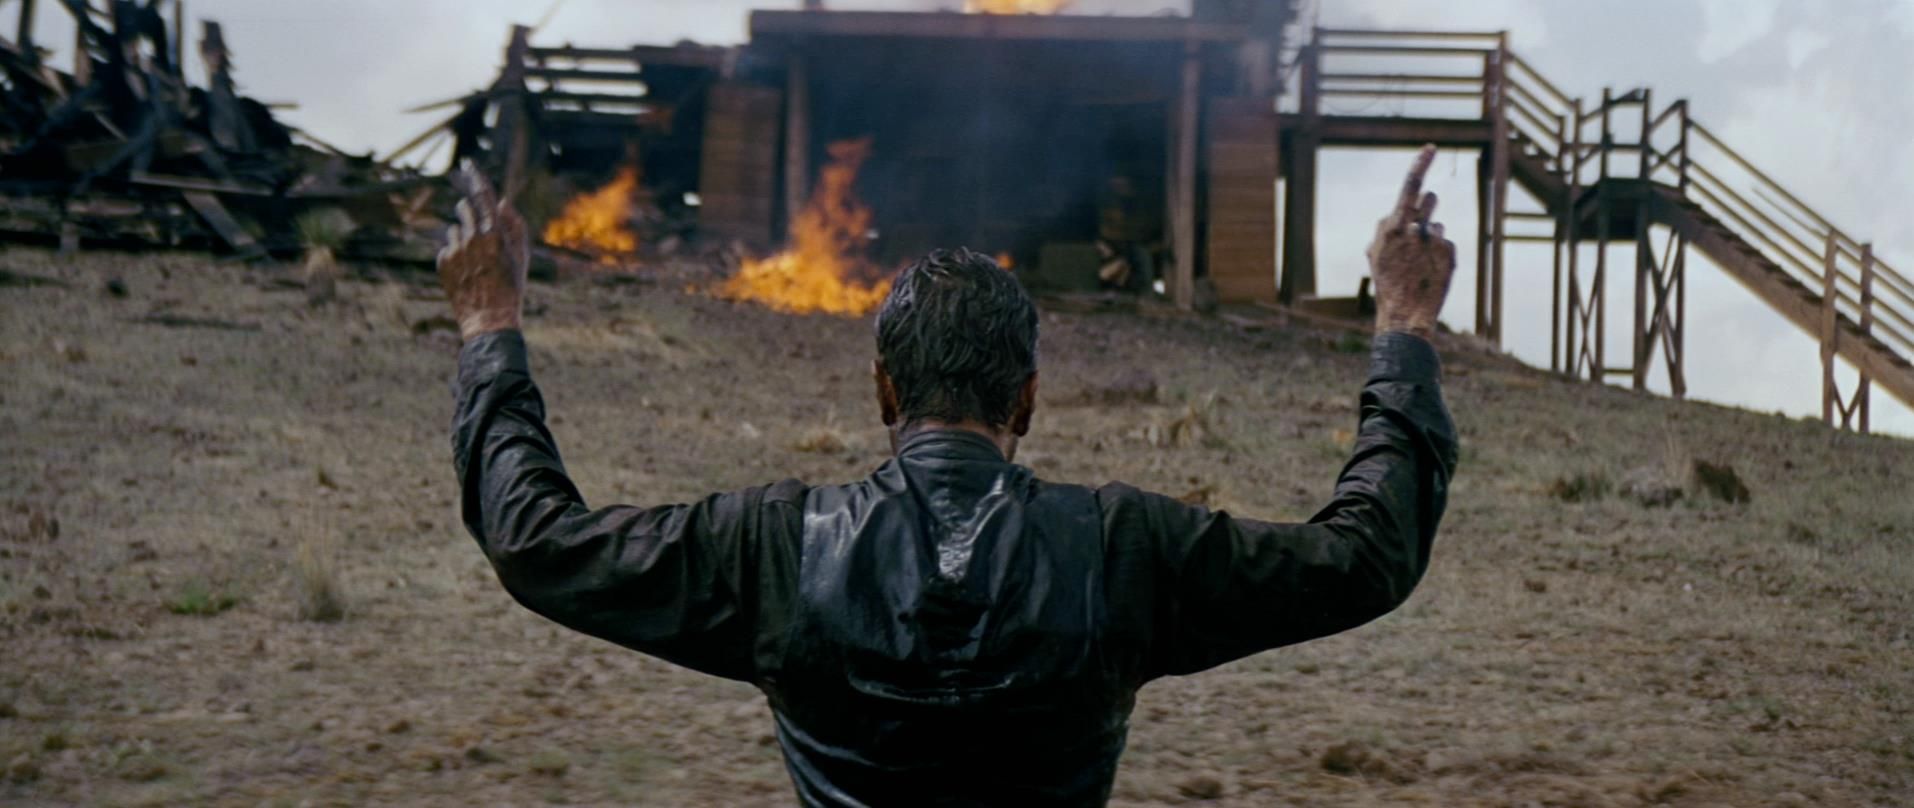 A man wearing black holds up both hands as he watches a wooden building set on fire